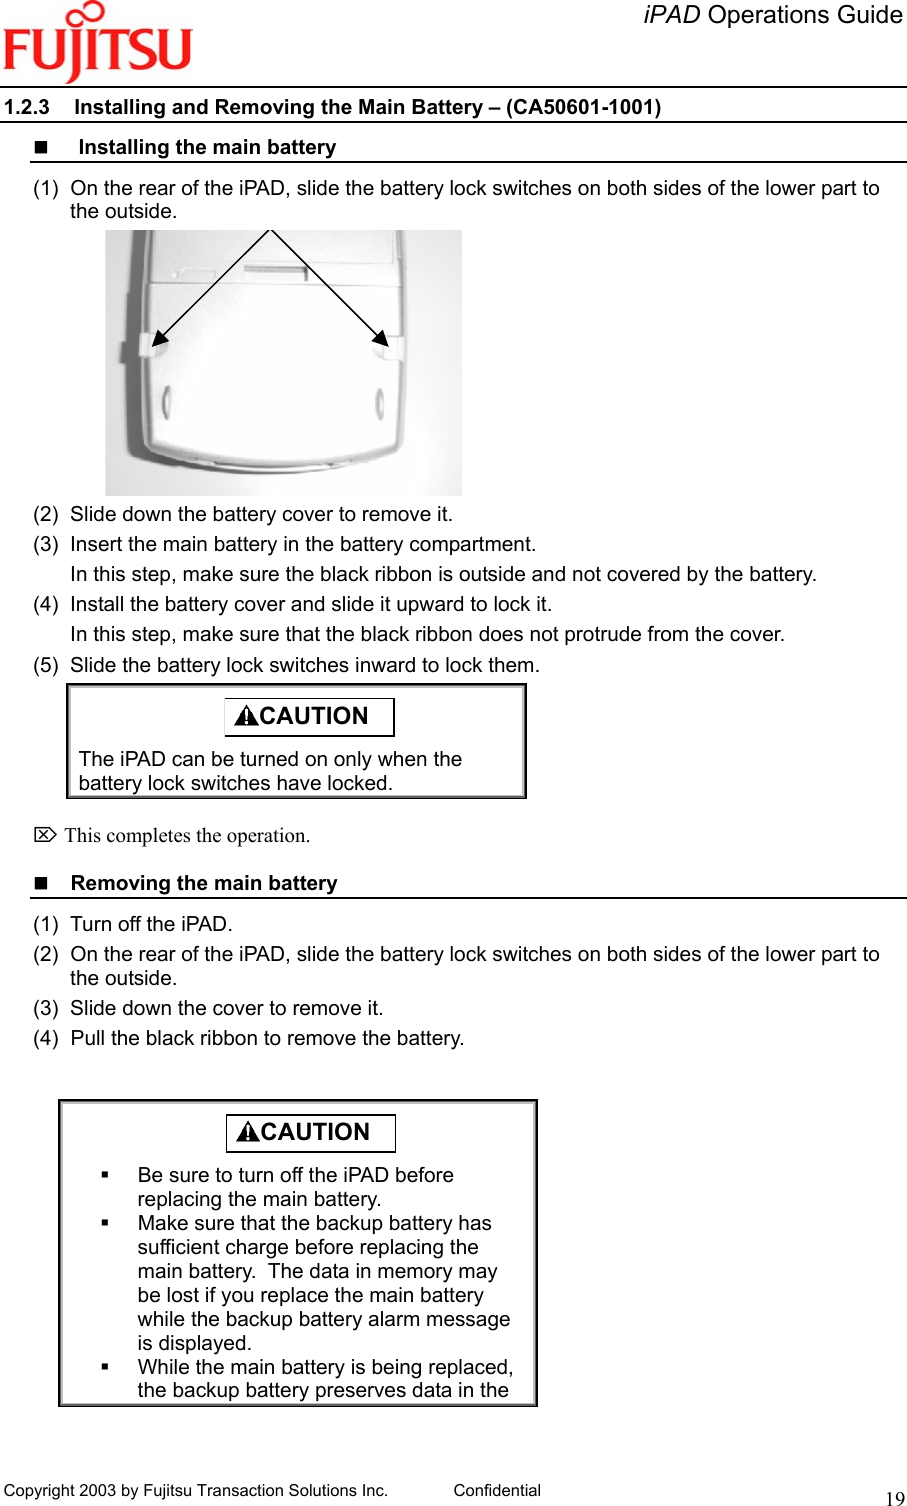   iPAD Operations Guide   Copyright 2003 by Fujitsu Transaction Solutions Inc. Confidential  191.2.3  Installing and Removing the Main Battery – (CA50601-1001)    Installing the main battery (1)  On the rear of the iPAD, slide the battery lock switches on both sides of the lower part to the outside.  (2)  Slide down the battery cover to remove it. (3)  Insert the main battery in the battery compartment. In this step, make sure the black ribbon is outside and not covered by the battery. (4)  Install the battery cover and slide it upward to lock it. In this step, make sure that the black ribbon does not protrude from the cover. (5)  Slide the battery lock switches inward to lock them.  CAUTION  The iPAD can be turned on only when the battery lock switches have locked.  ⌦ This completes the operation.    Removing the main battery (1)  Turn off the iPAD. (2)  On the rear of the iPAD, slide the battery lock switches on both sides of the lower part to the outside. (3)  Slide down the cover to remove it. (4)  Pull the black ribbon to remove the battery.   CAUTION    Be sure to turn off the iPAD before replacing the main battery.   Make sure that the backup battery has sufficient charge before replacing the main battery.  The data in memory may be lost if you replace the main battery while the backup battery alarm message is displayed.   While the main battery is being replaced, the backup battery preserves data in the 